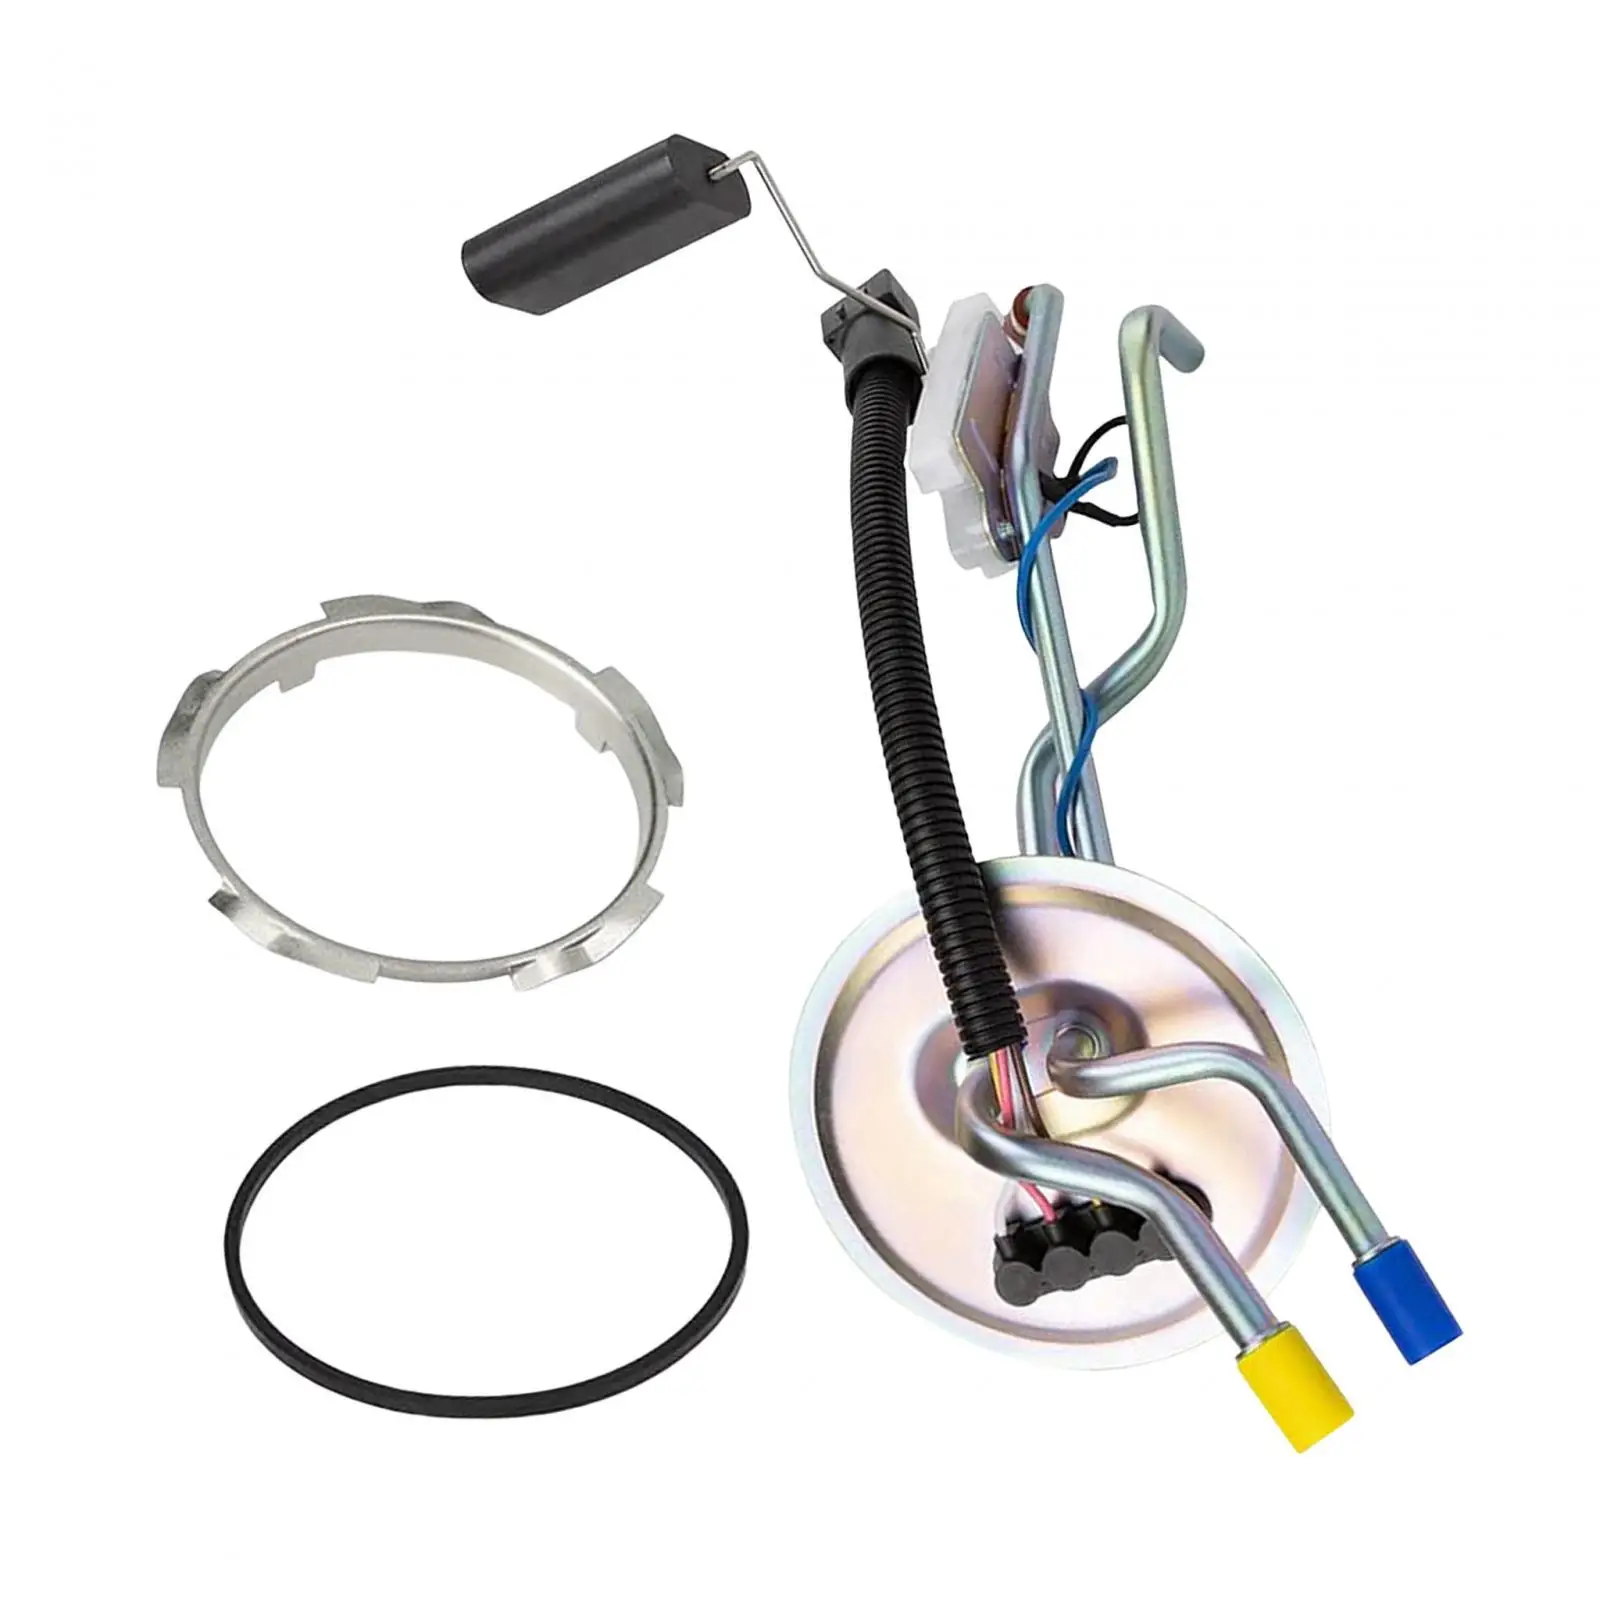 Fuel Pump Sending Unit Fmsu-9der Repair Parts for Ford F250 F350 94-97 Accessories Easily to Install Stable Performance